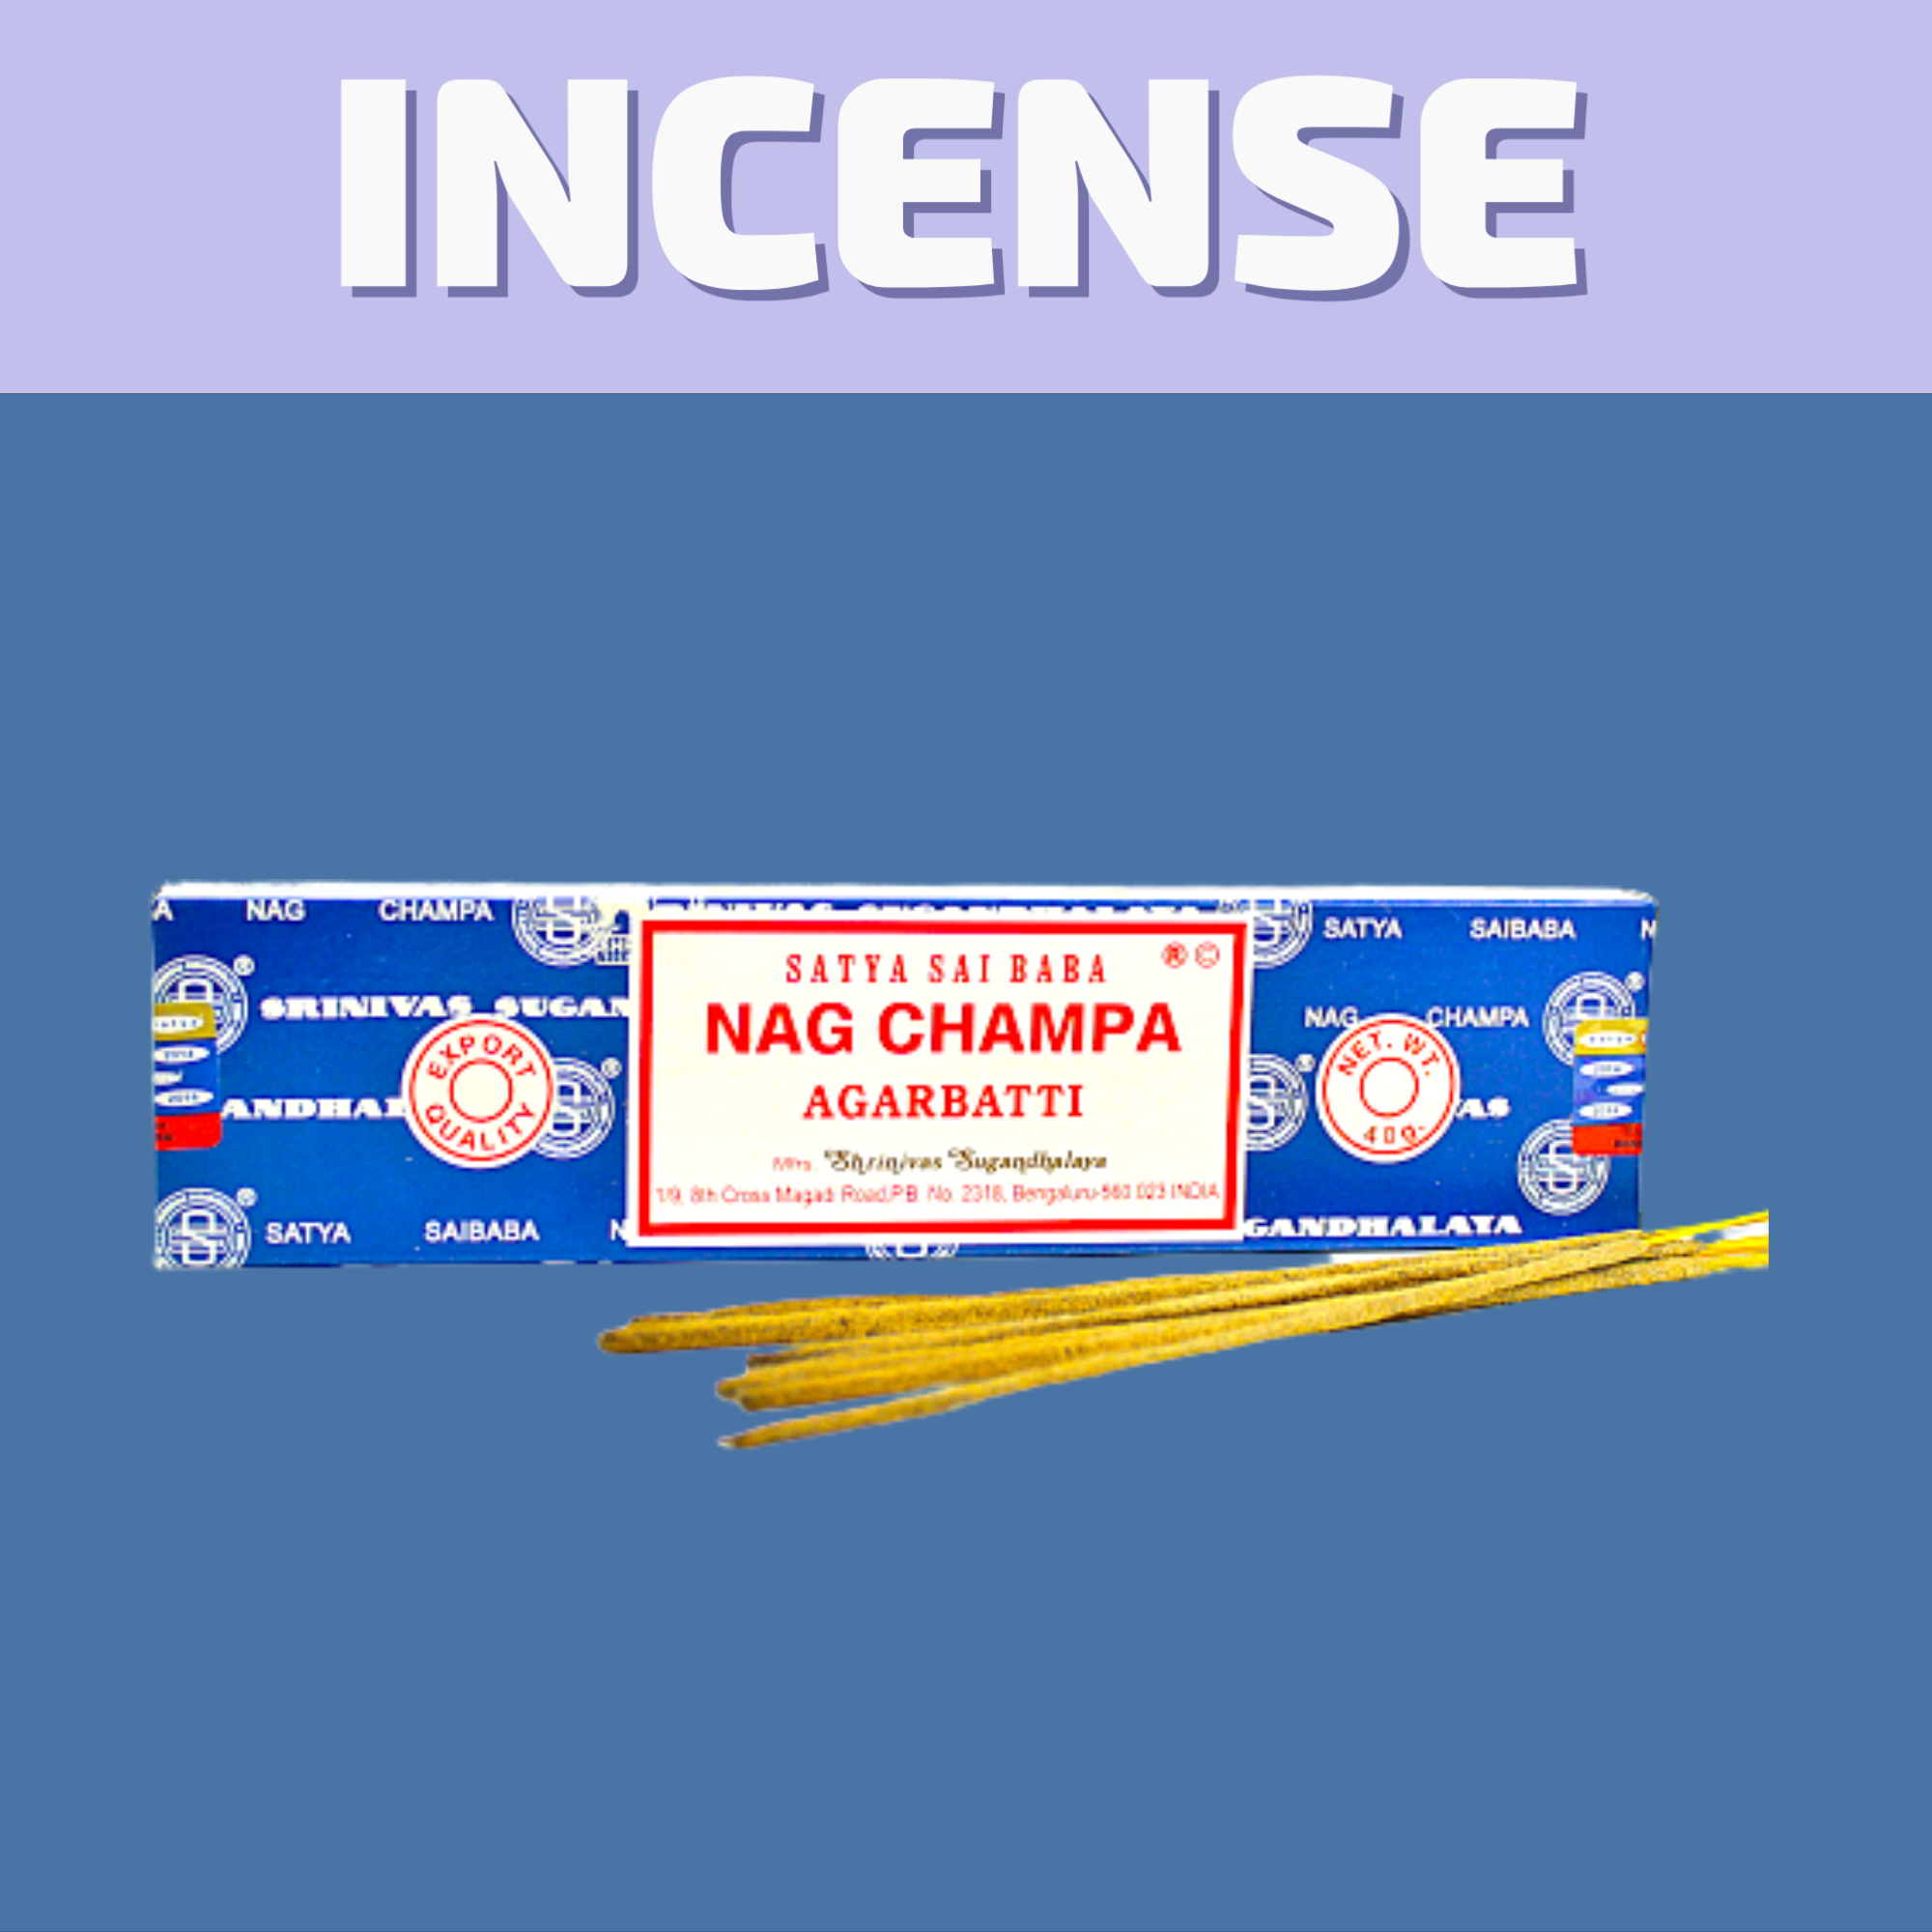 Order Nag Champa Incense and Incense Burners online for same day delivery in Winnipeg or visit our dispensary on 580 Academy Road. 